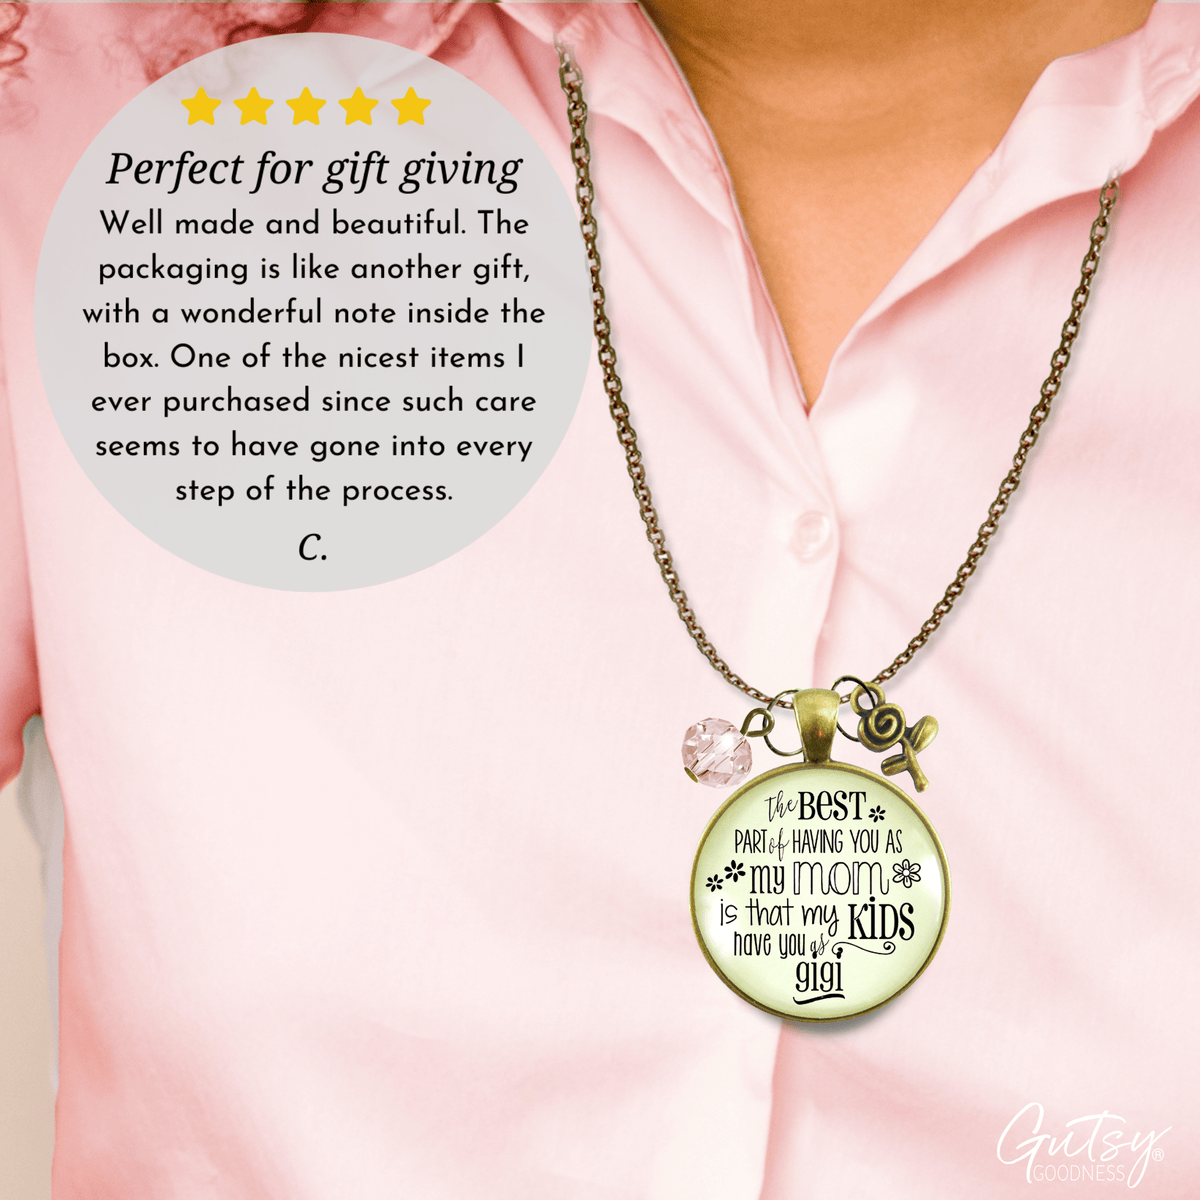 Gutsy Goodness Gigi Necklace Best Part of You Mom Kids Have Grandma Jewelry Gift From Daughter - Gutsy Goodness Handmade Jewelry;Gigi Necklace Best Part Of You Mom Kids Have Grandma Jewelry Gift From Daughter - Gutsy Goodness Handmade Jewelry Gifts